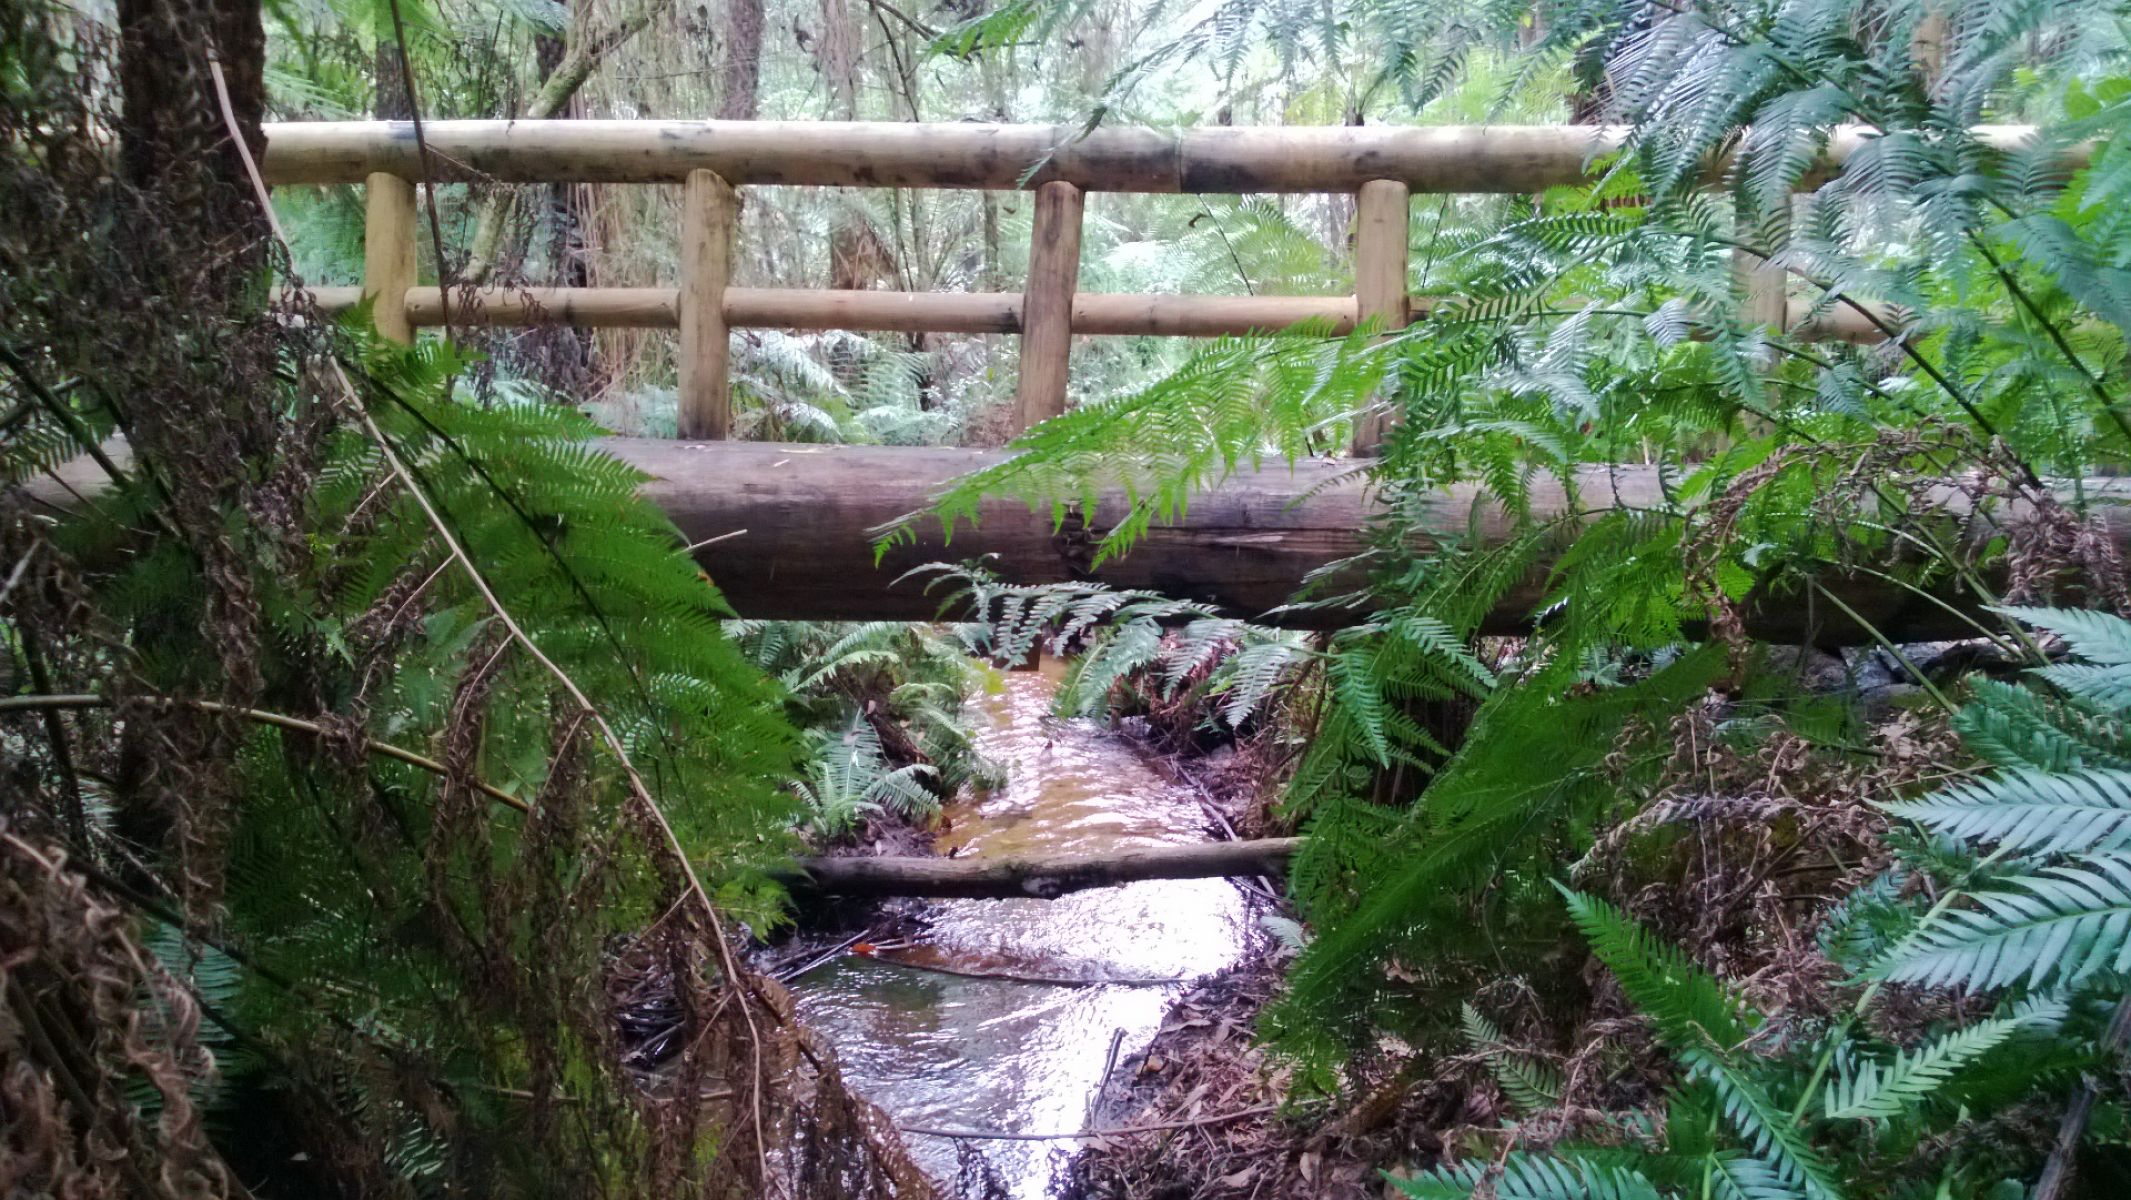 A small stream runs underneath a wooden fence in a forest